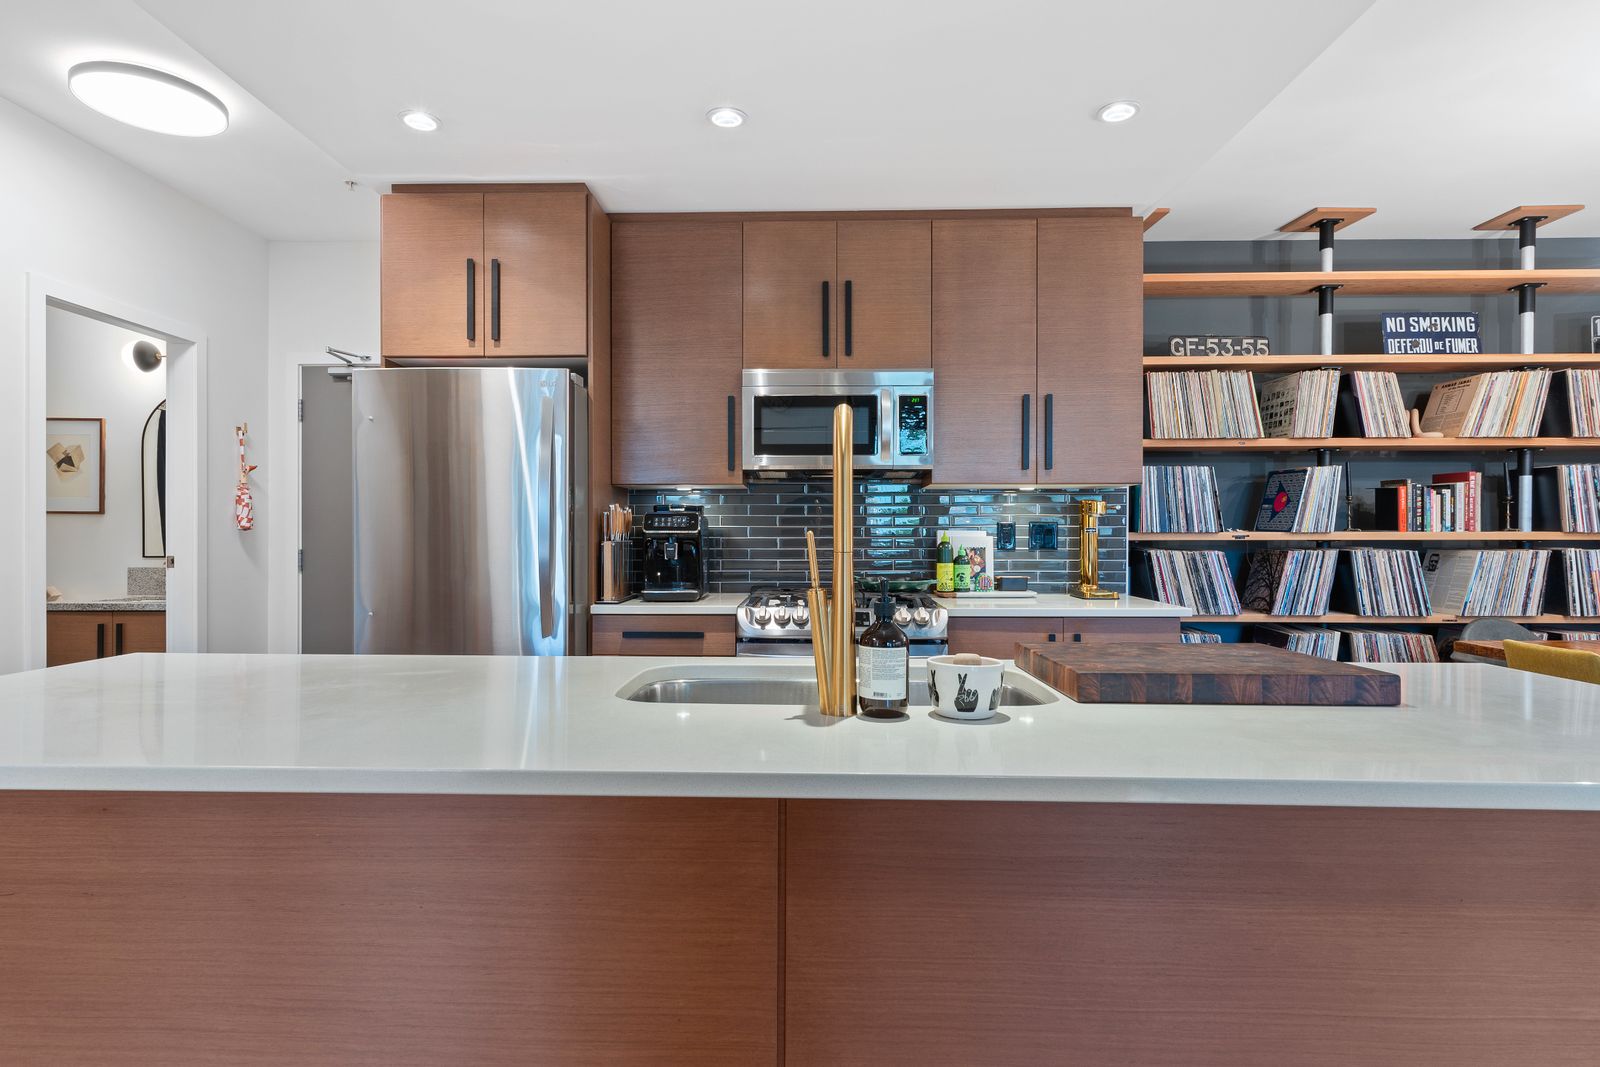 Kitchen with white countertops, brown wood cupboards, and stainless steel appliances.